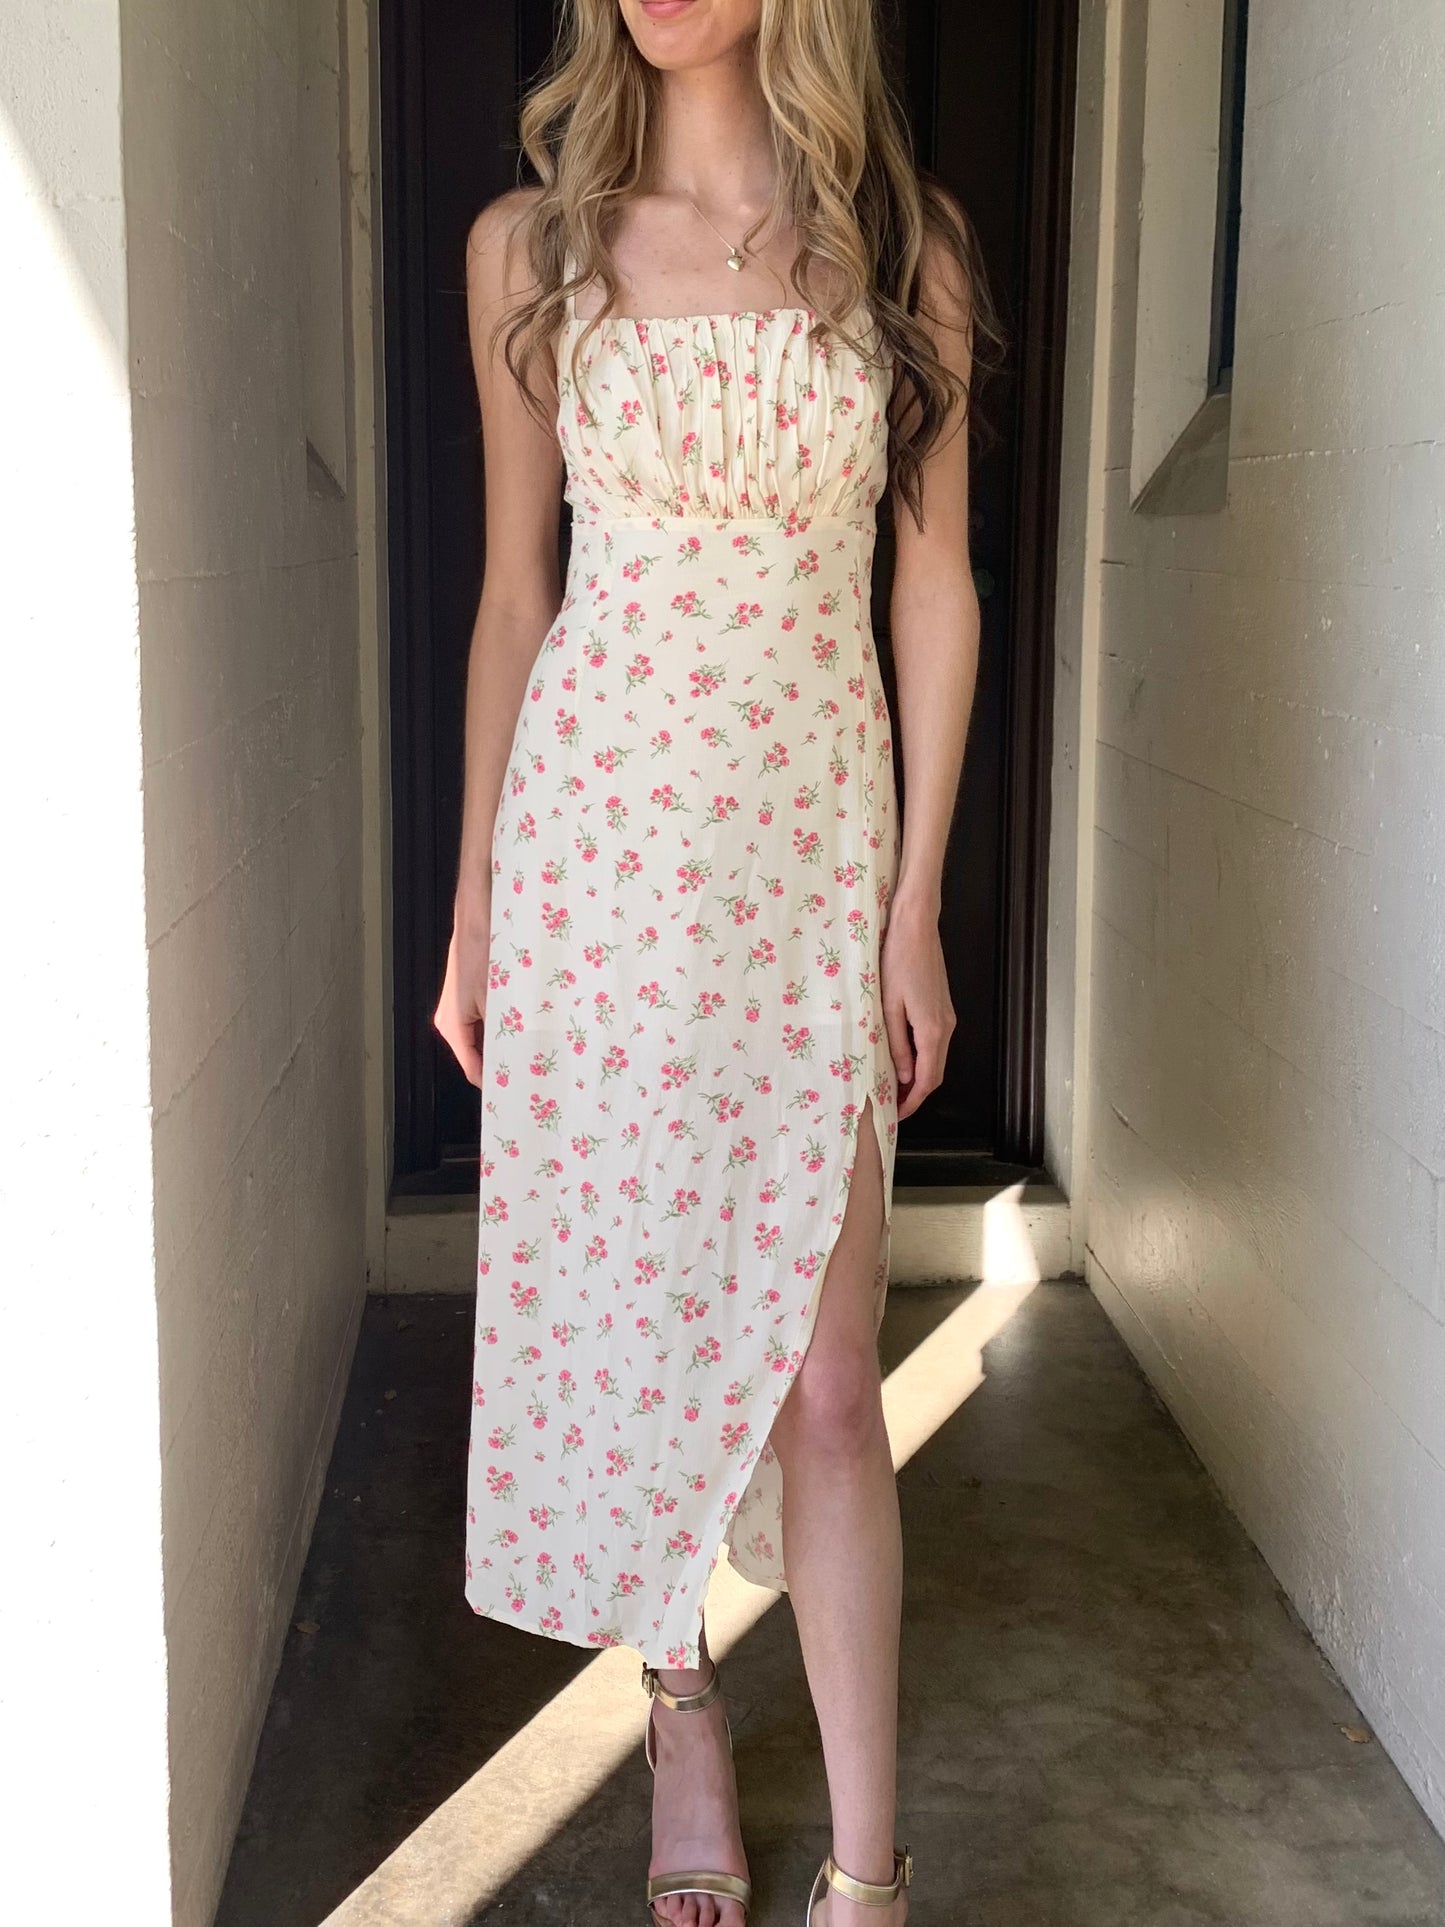 Baby Pink Floral Dress